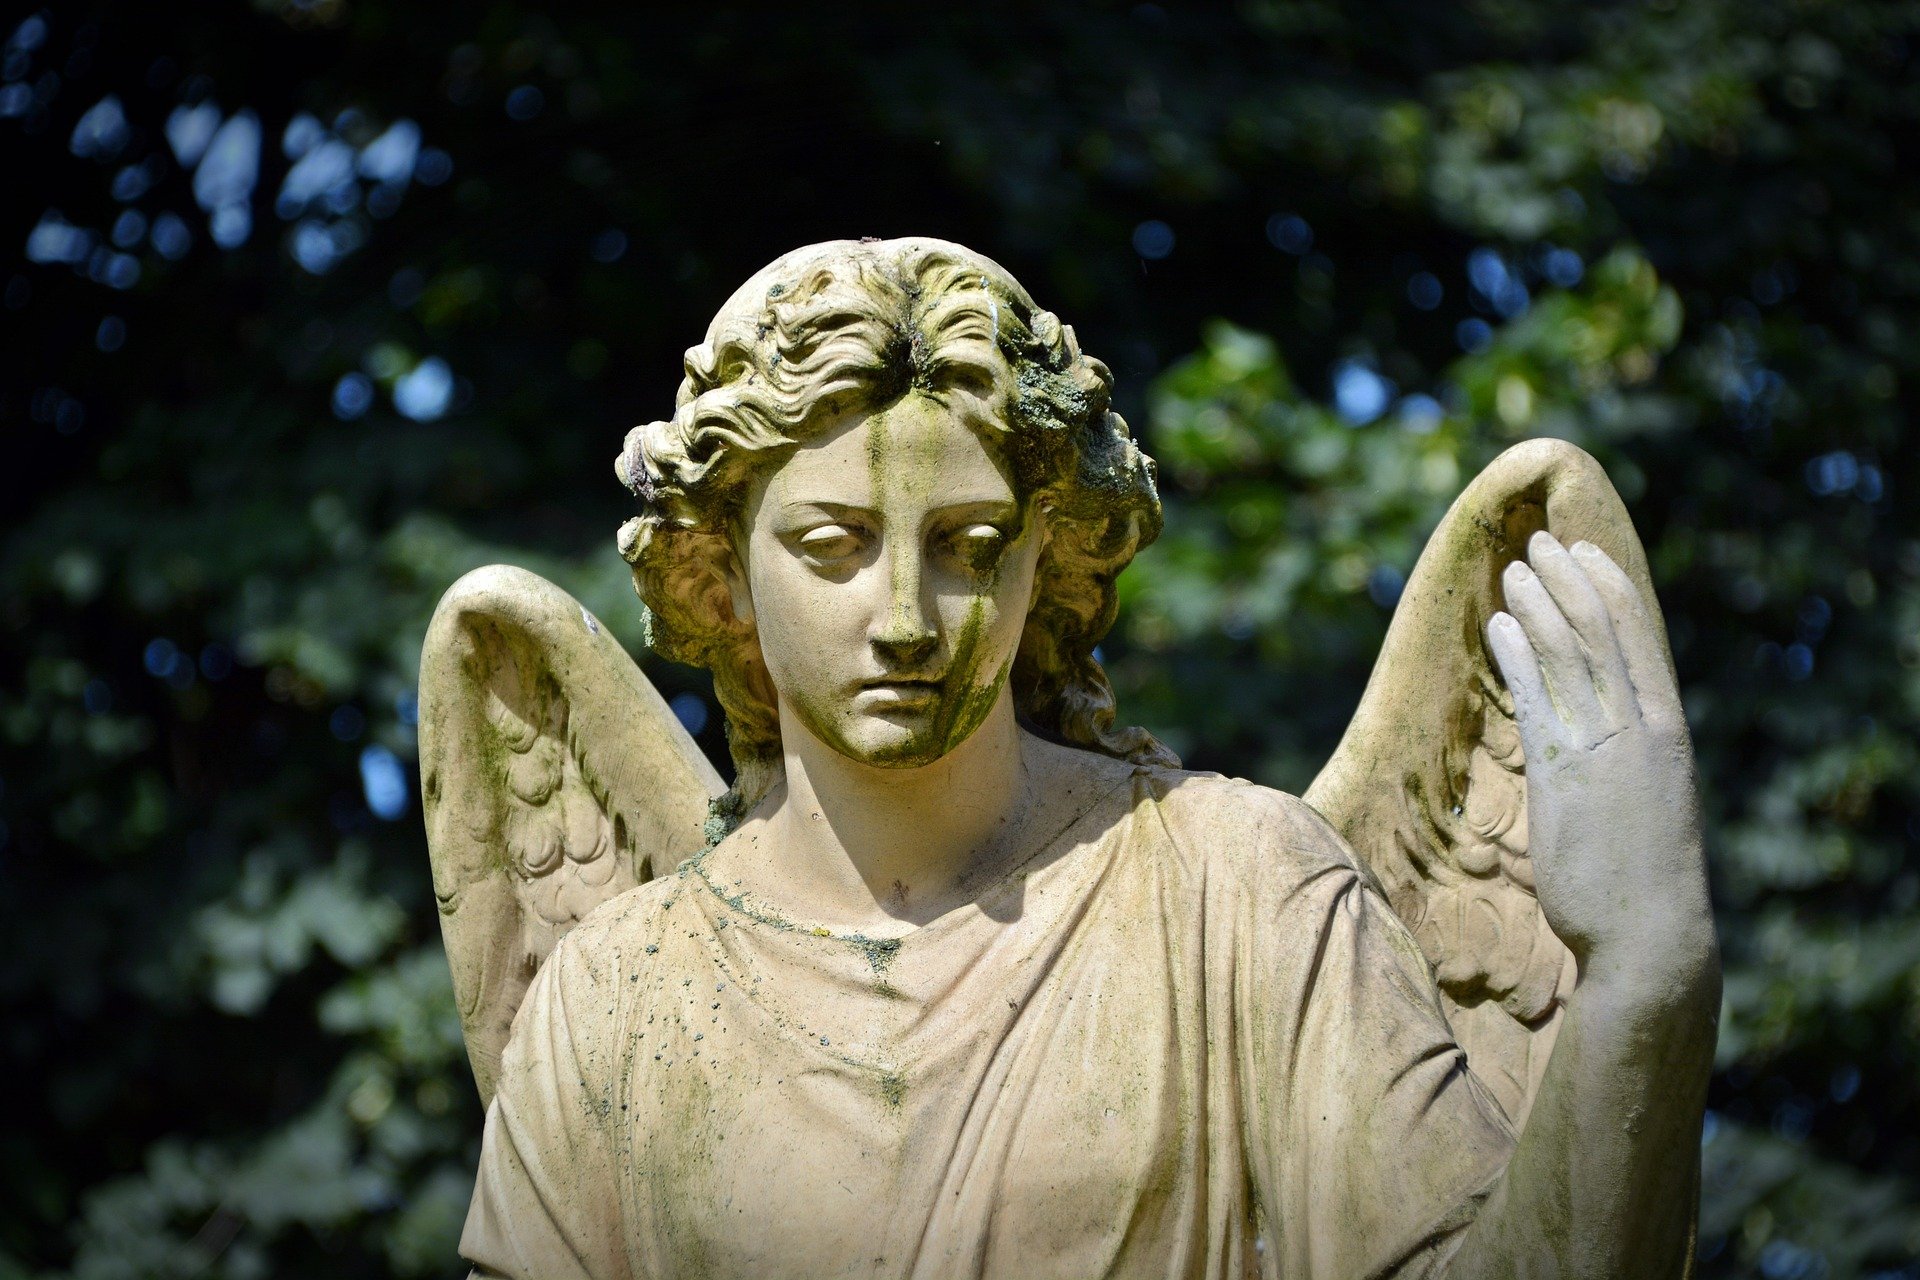 Female Angel Sculpture In A Park